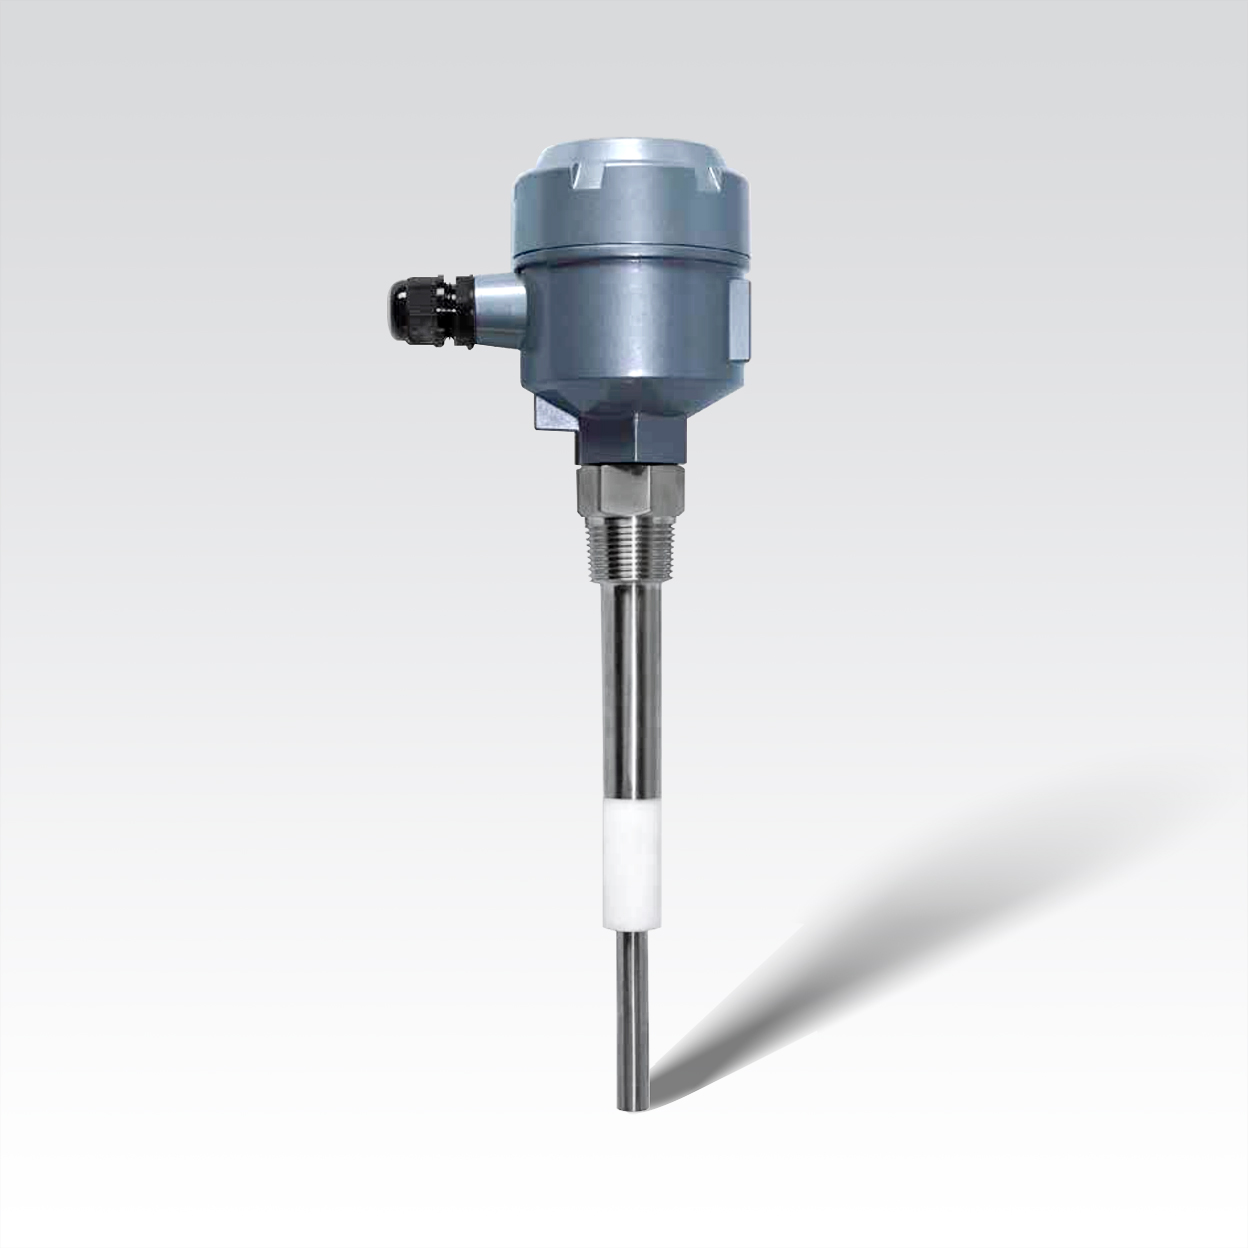 ZS3X Radio Frequency Digital Capacitor Level Transmitter